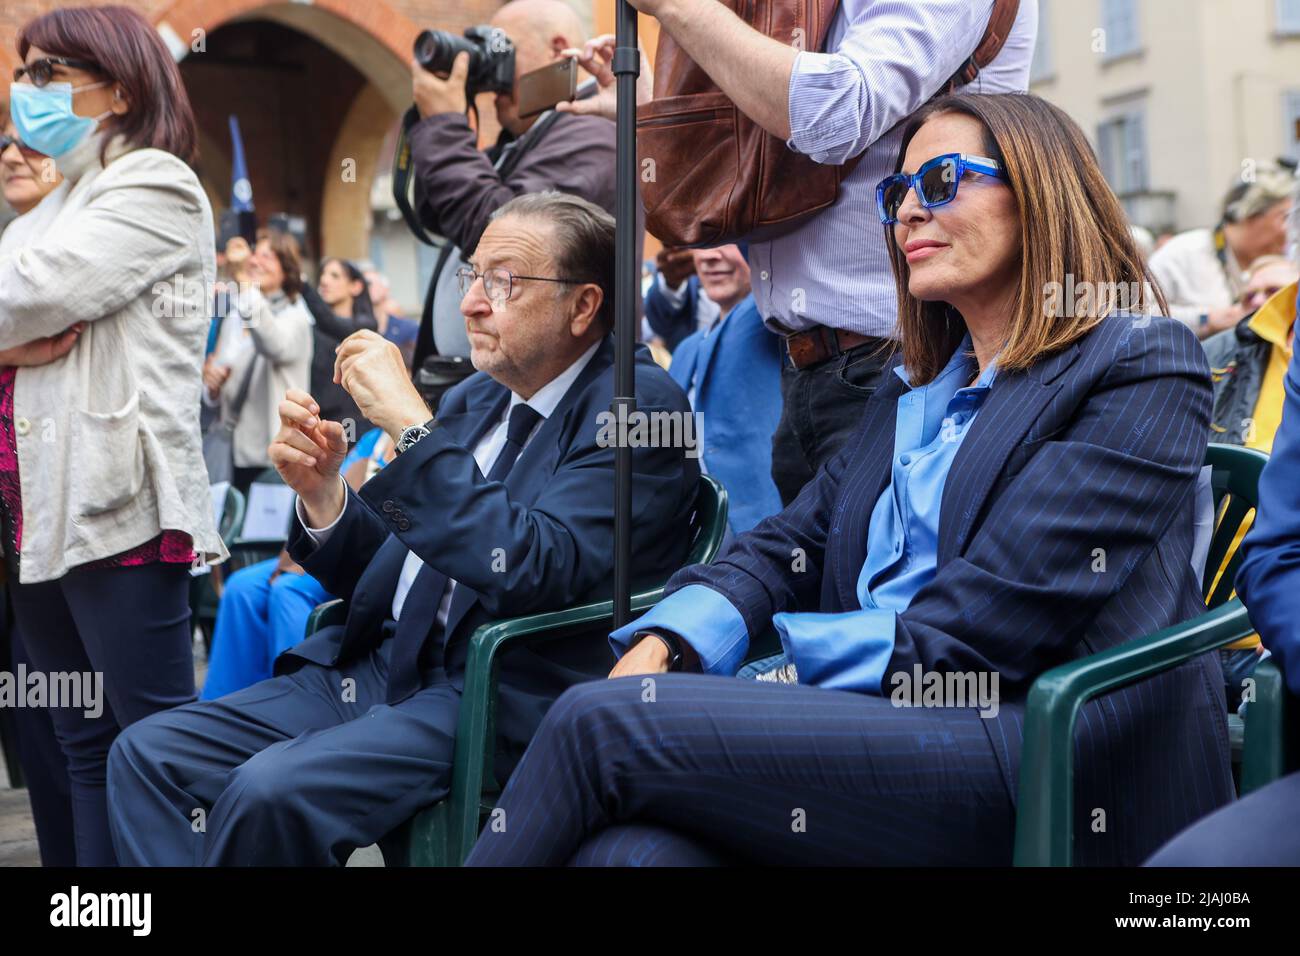 Giorgia Meloni, leader of the political party of the Fratelli d'Italia spoke in support of the center-right candidate Dario Allevi in Monza, Italy, on May 30, 2022 Stock Photo